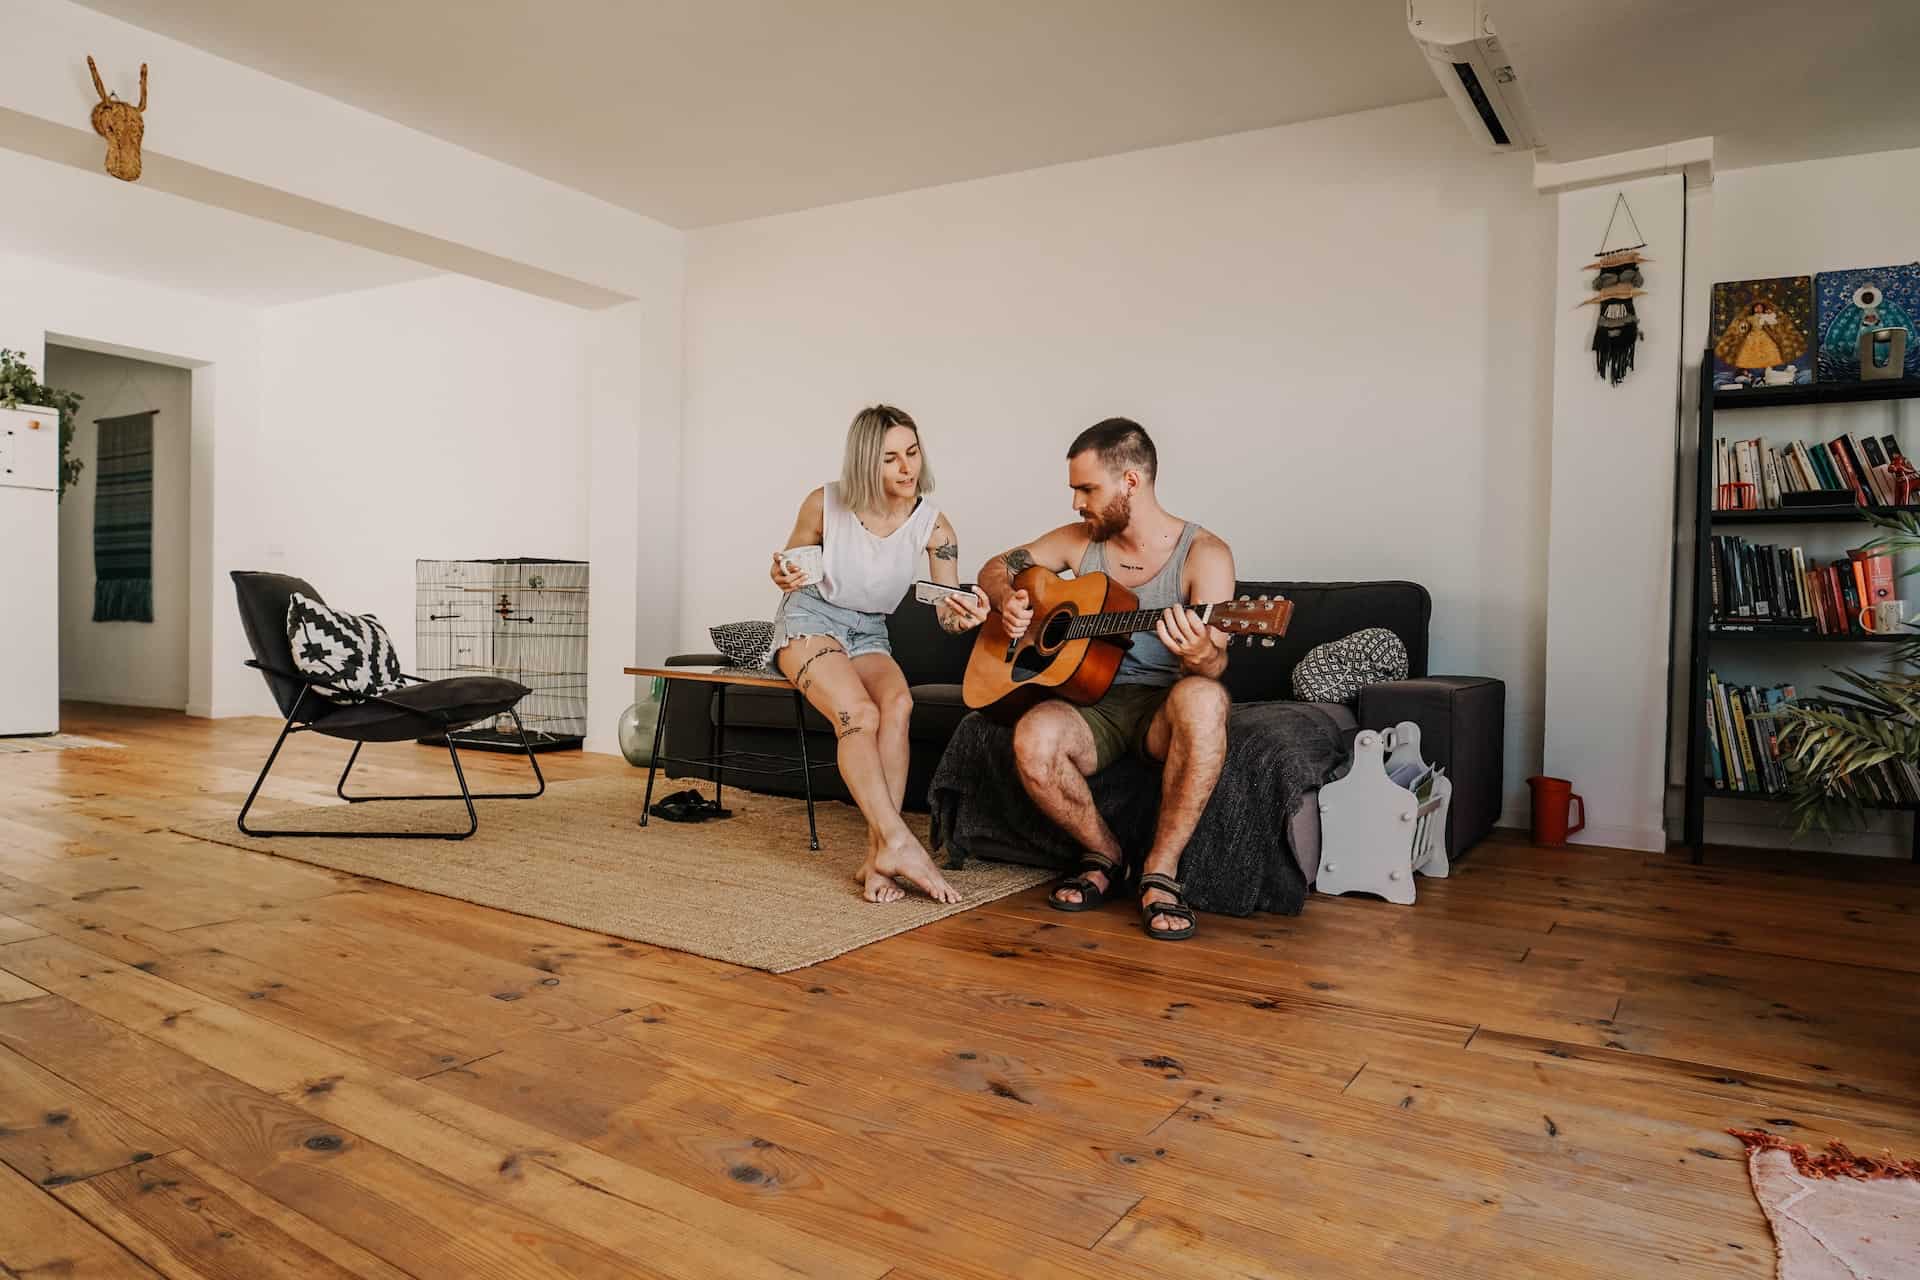 How To Learn Guitar In Home - Man And Woman On Couch Playing Guitar